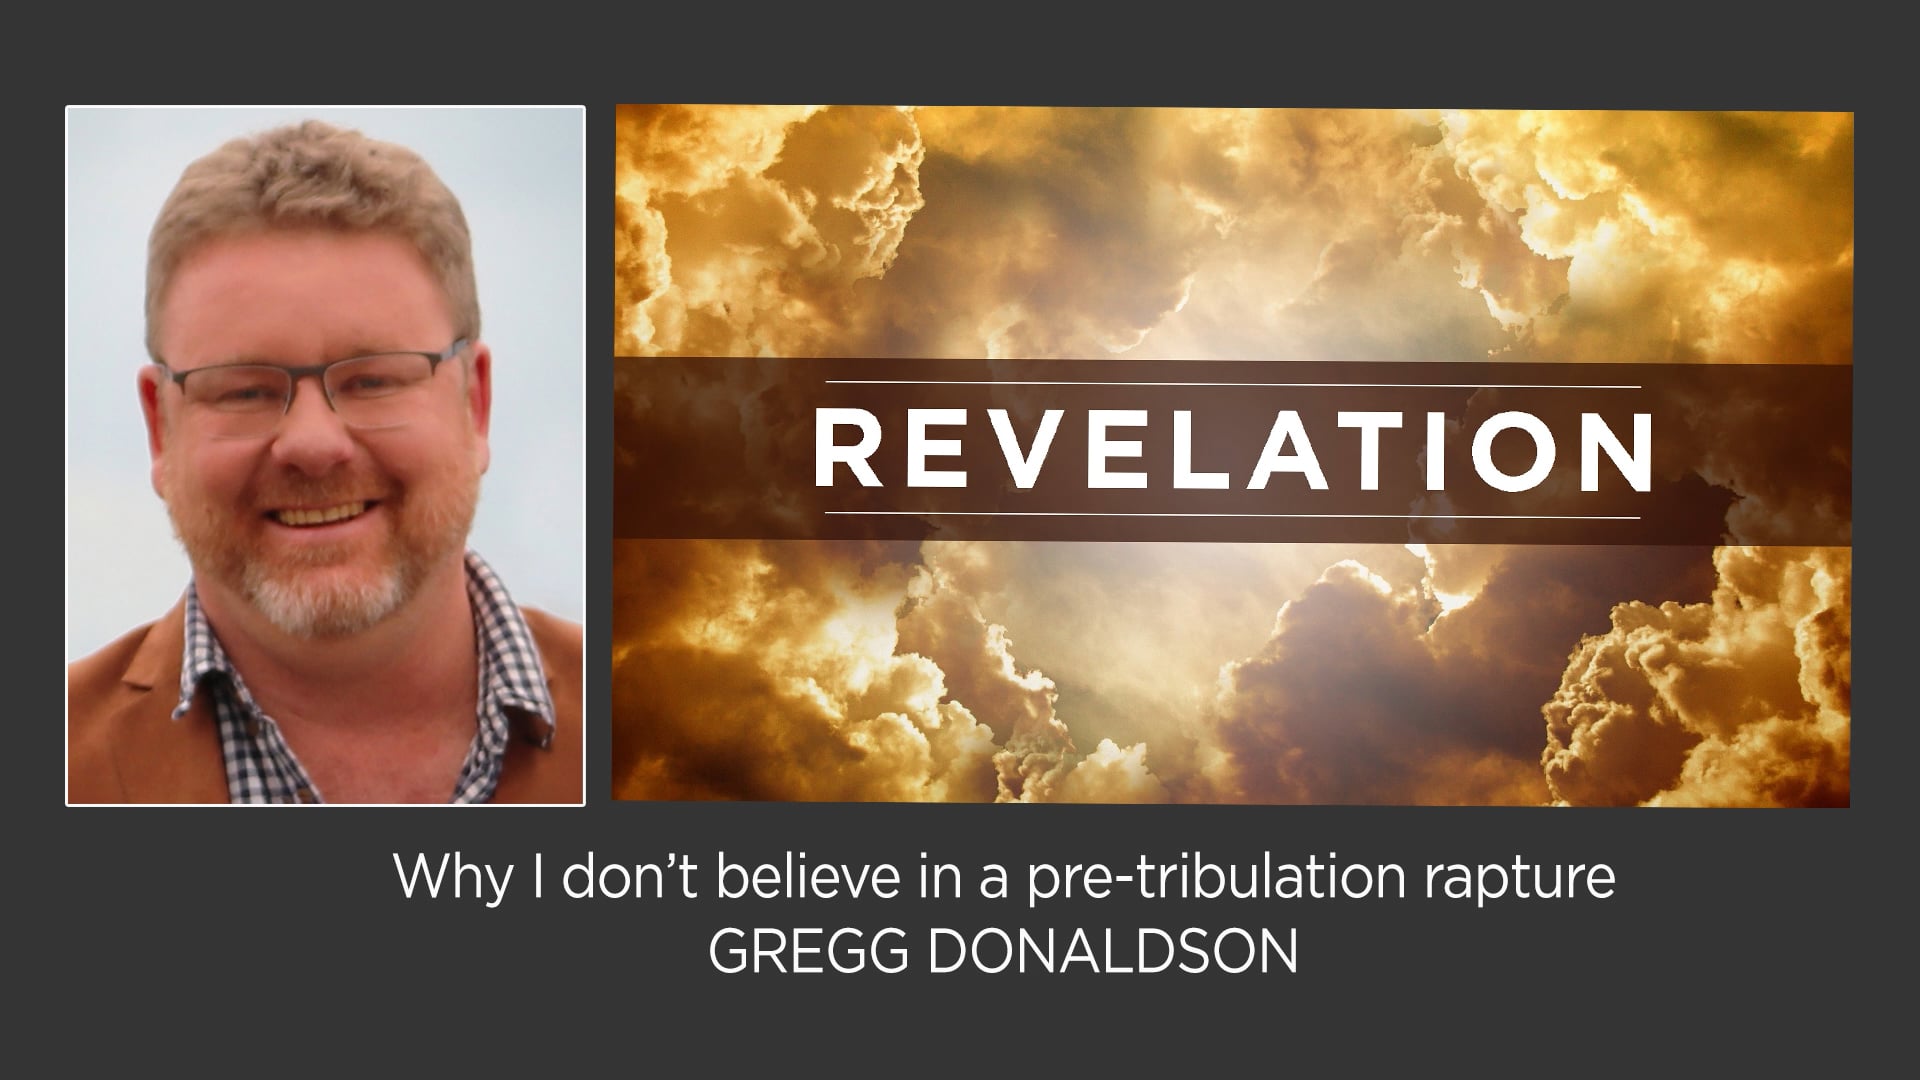 Why I don't believe in a pre-tribulation rapture